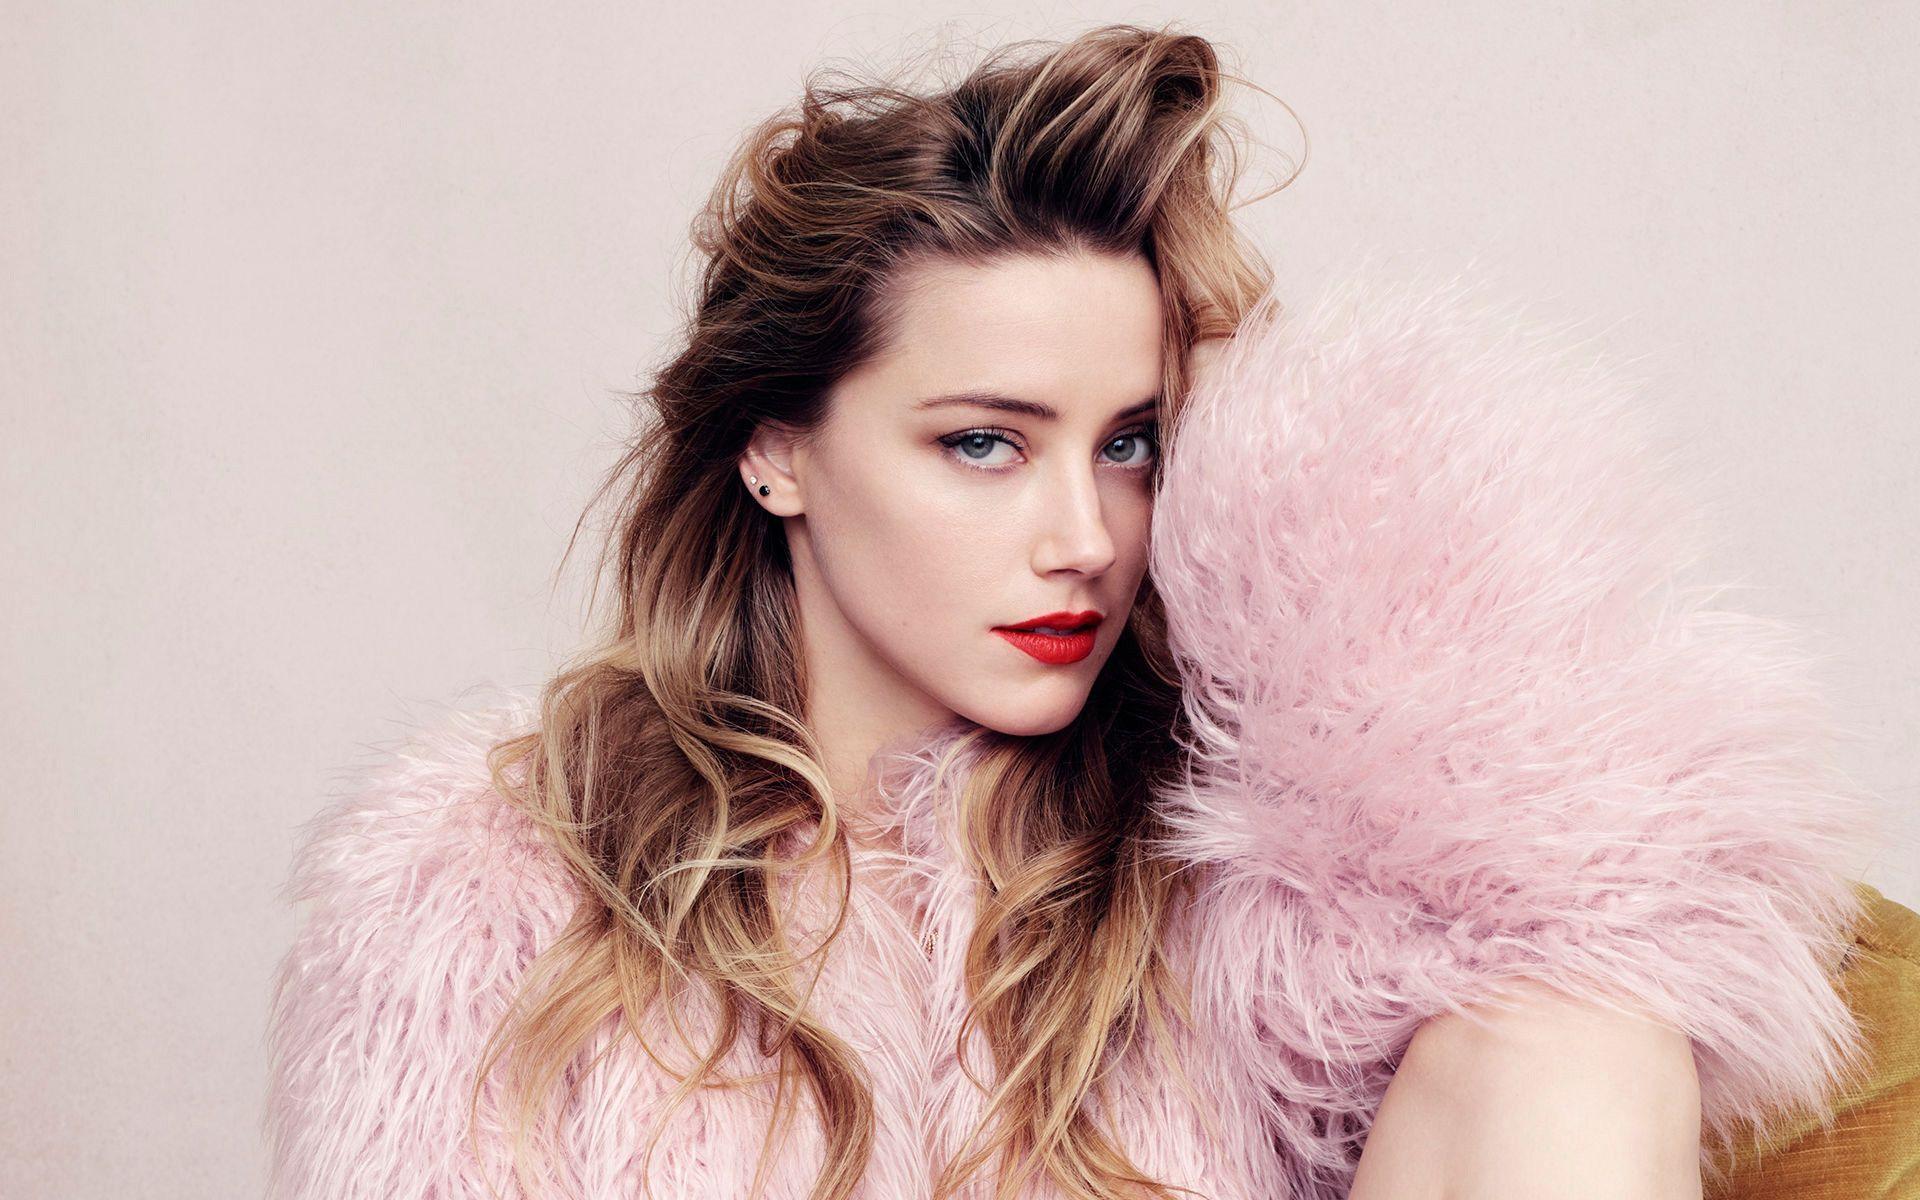 Amber Heard Wallpaper background picture